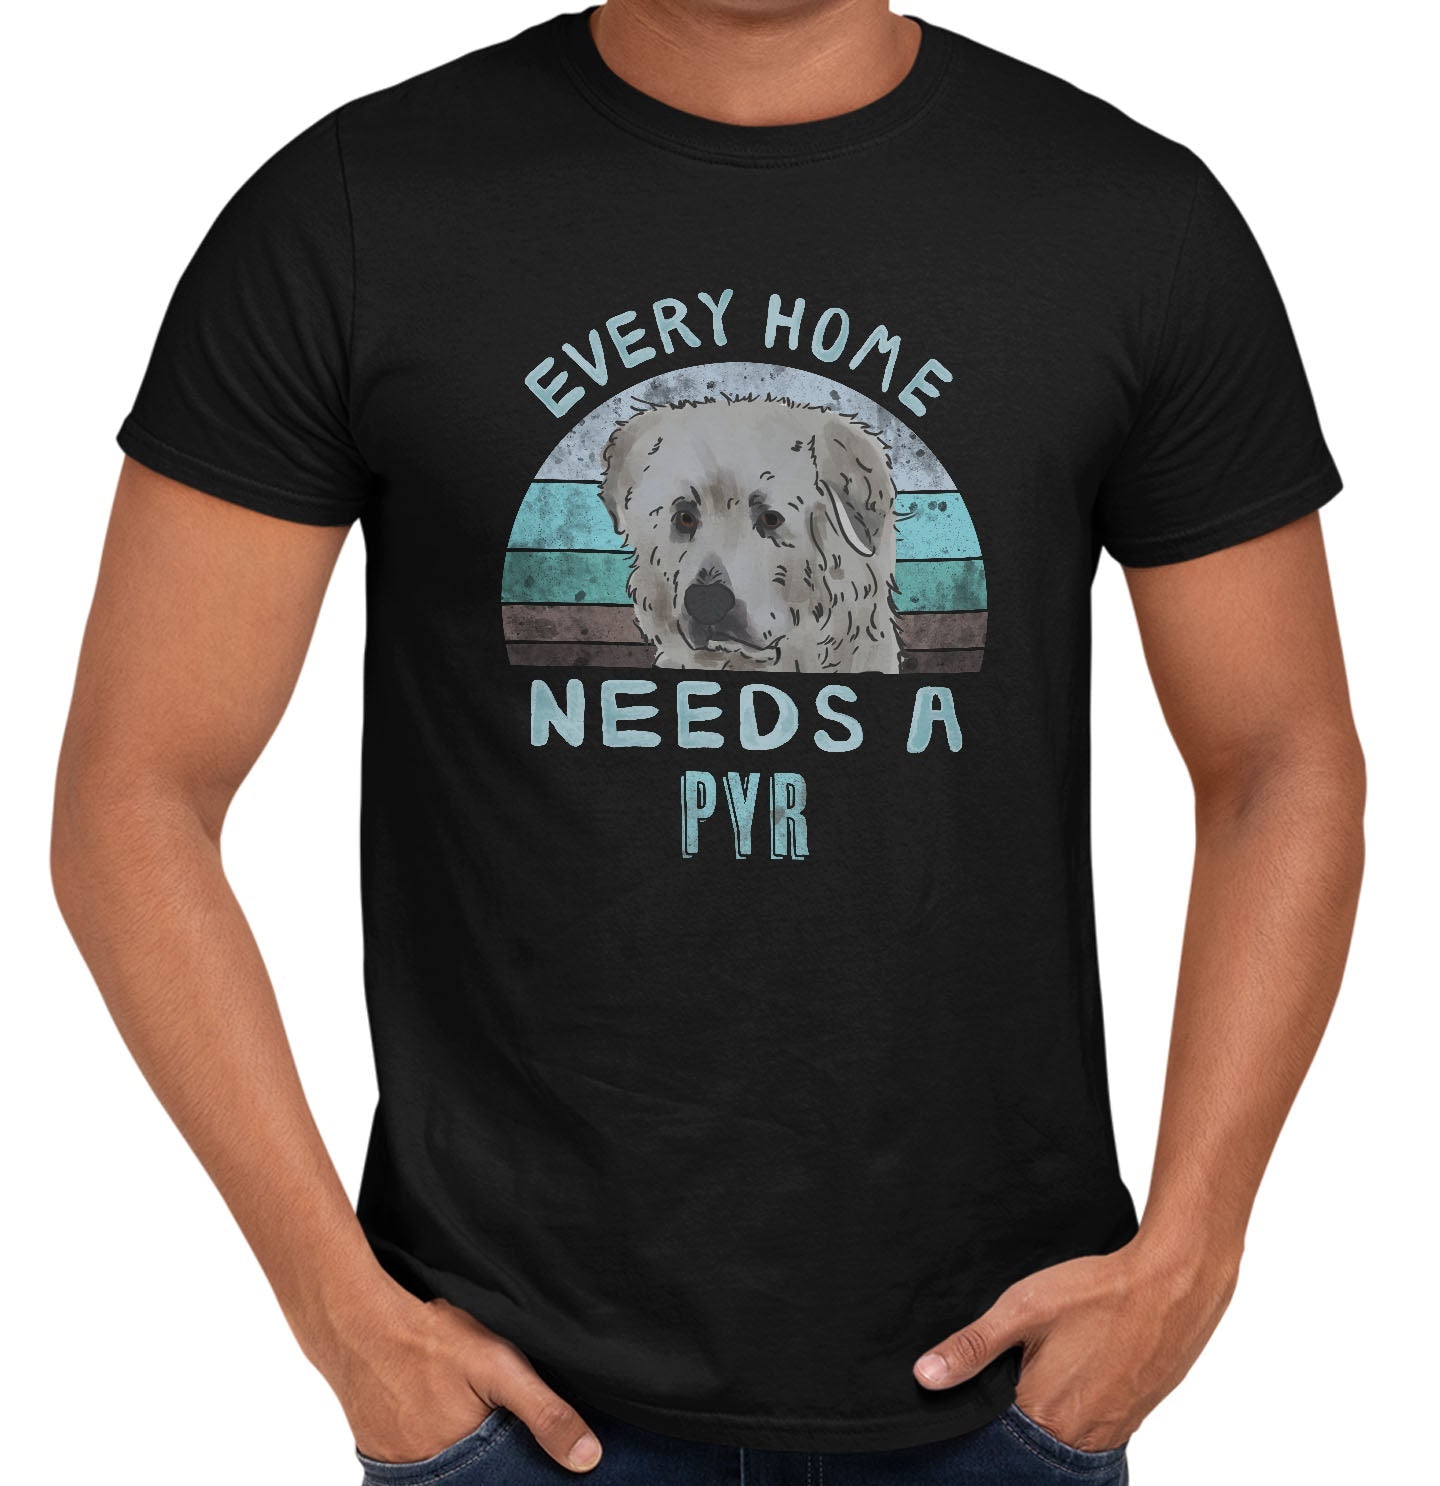 Every Home Needs a Great Pyrenees - Adult Unisex T-Shirt